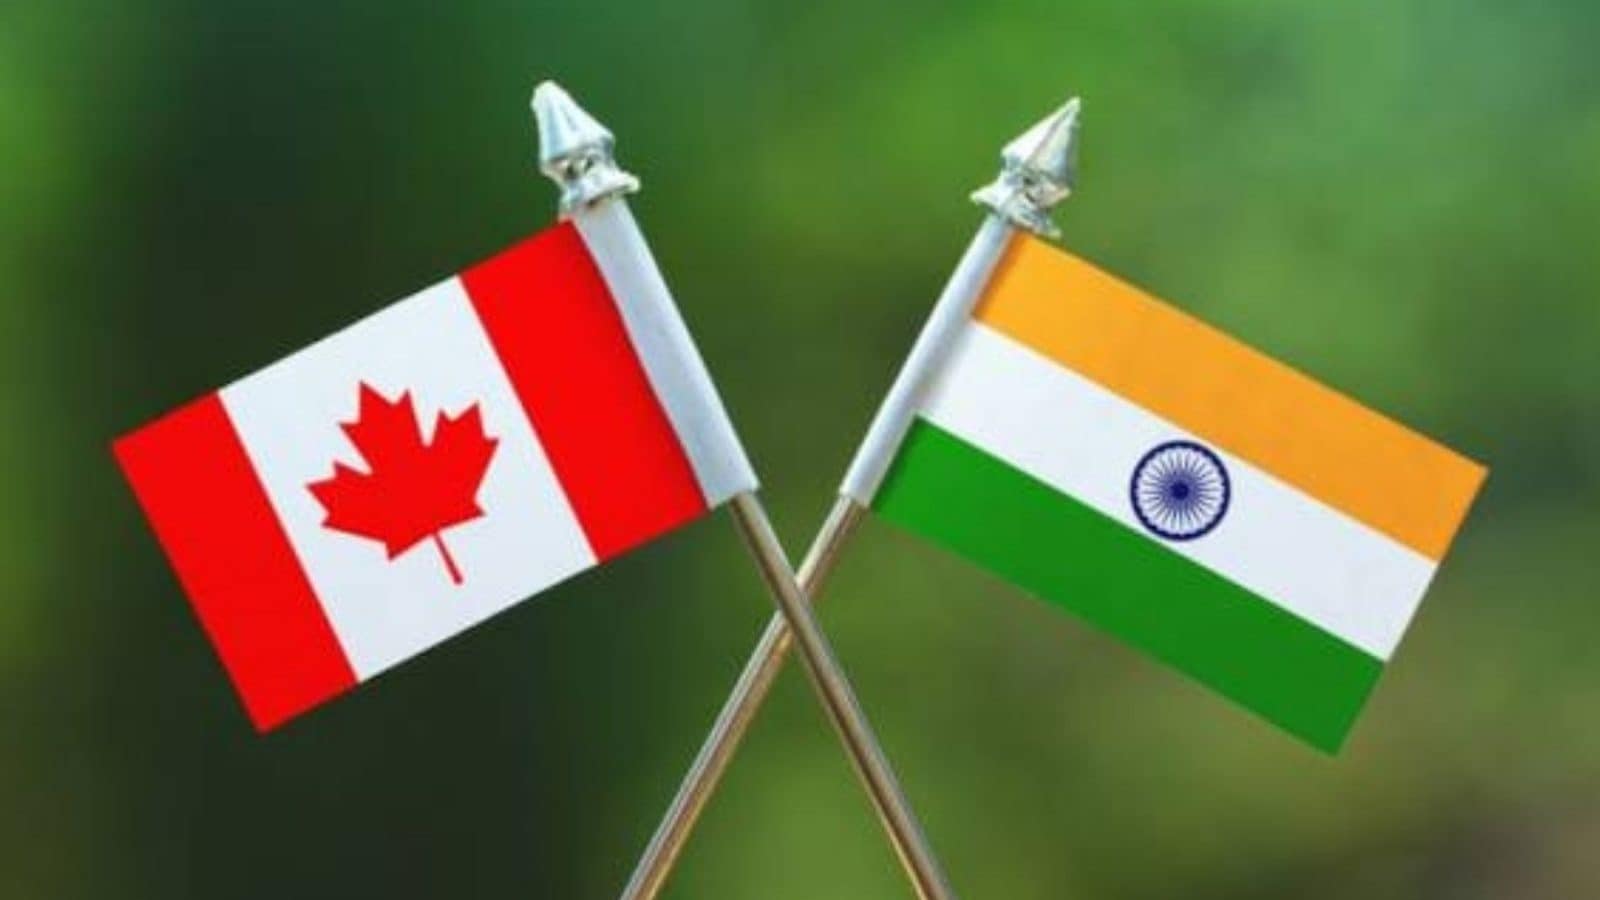 India and Canada will discuss the proposed free trade agreement on